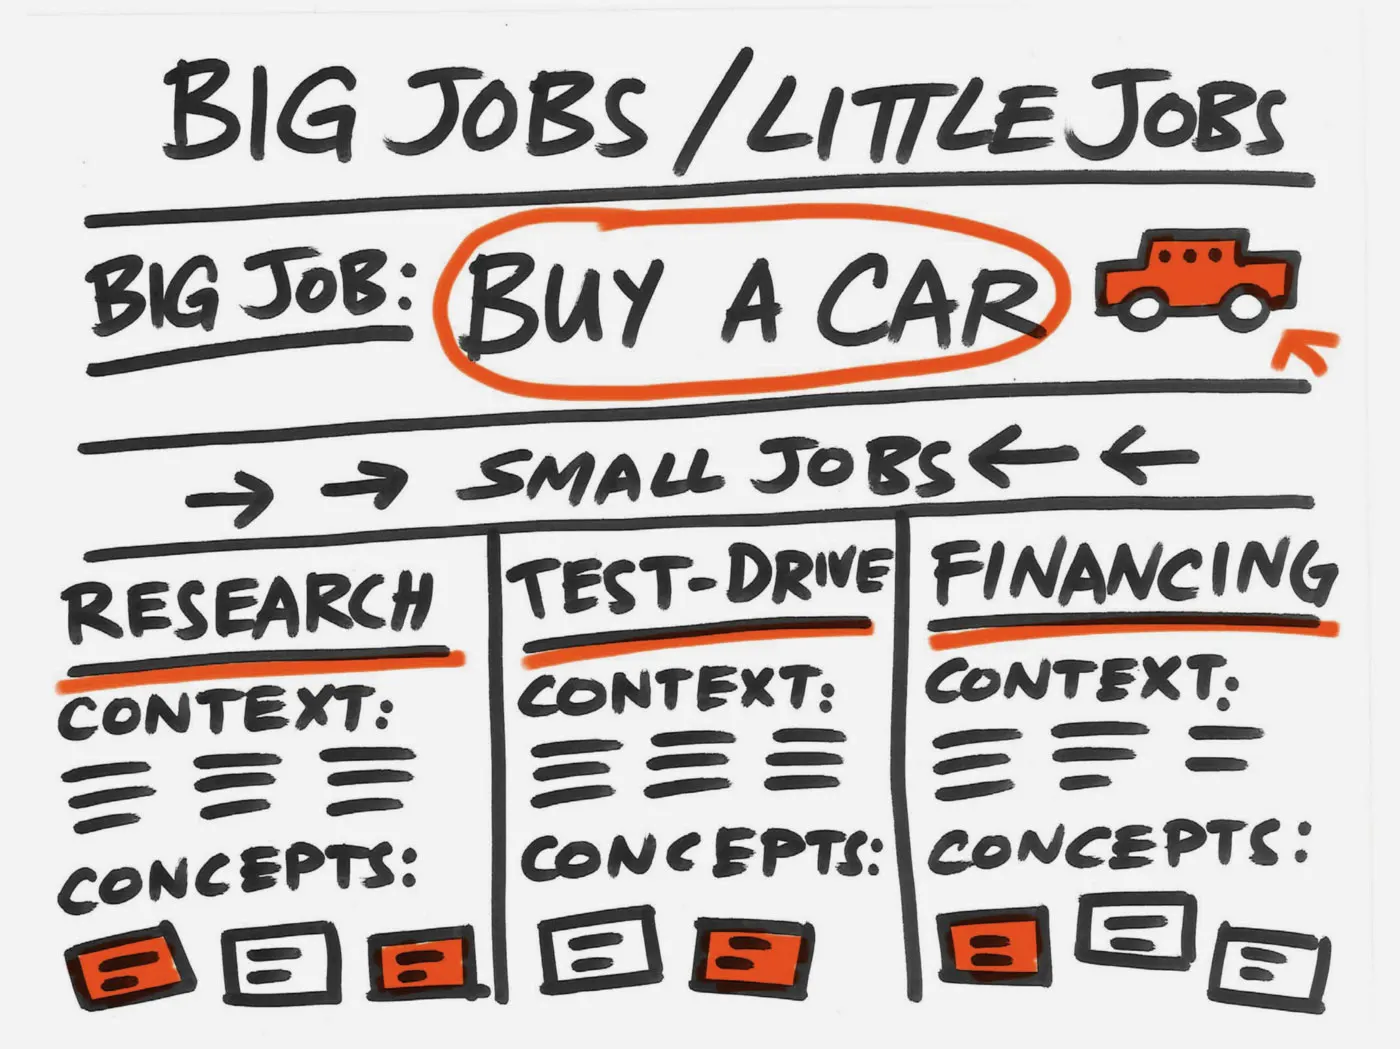 Black marker sketch with the heading "Big Jobs/Little Jobs," the subheads "Big Job: Buy a car" and "Small Jobs: Research. Test drive. Financing."